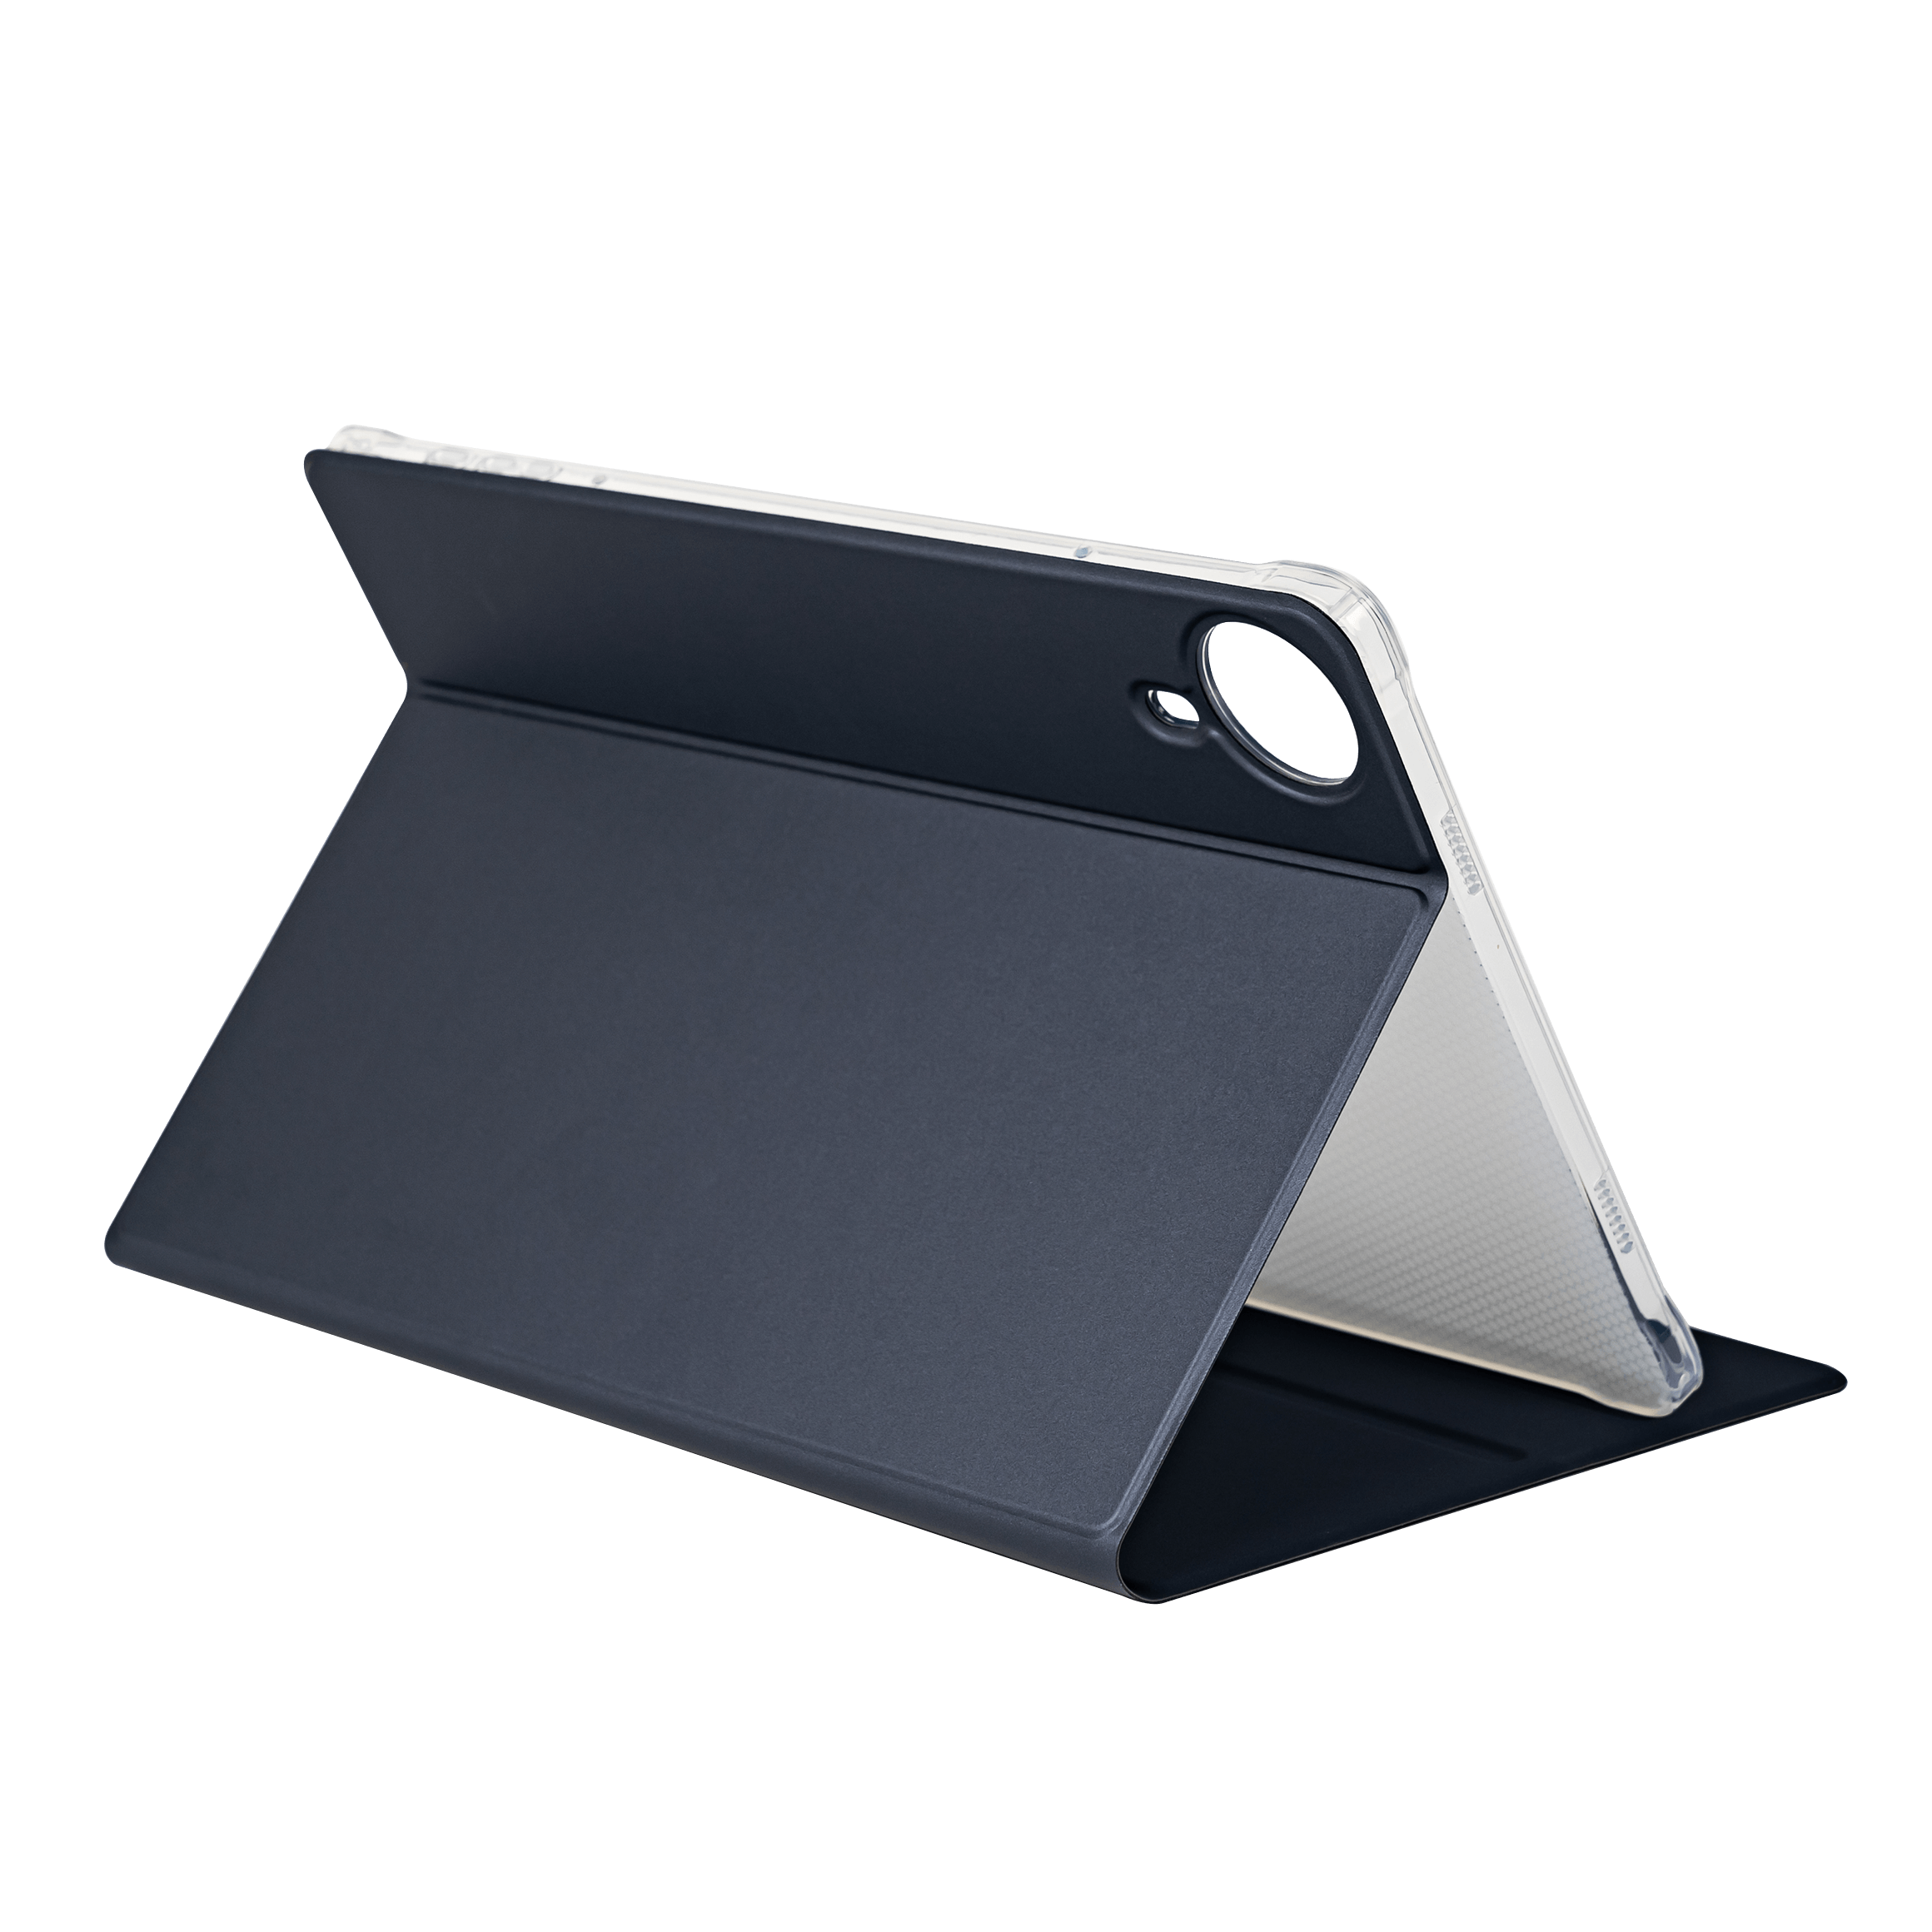 Elegant T65 Max tablet folio case with a magnetic closure, highlighting the secure fit and seamless design that offers full protection against scratches and impacts.